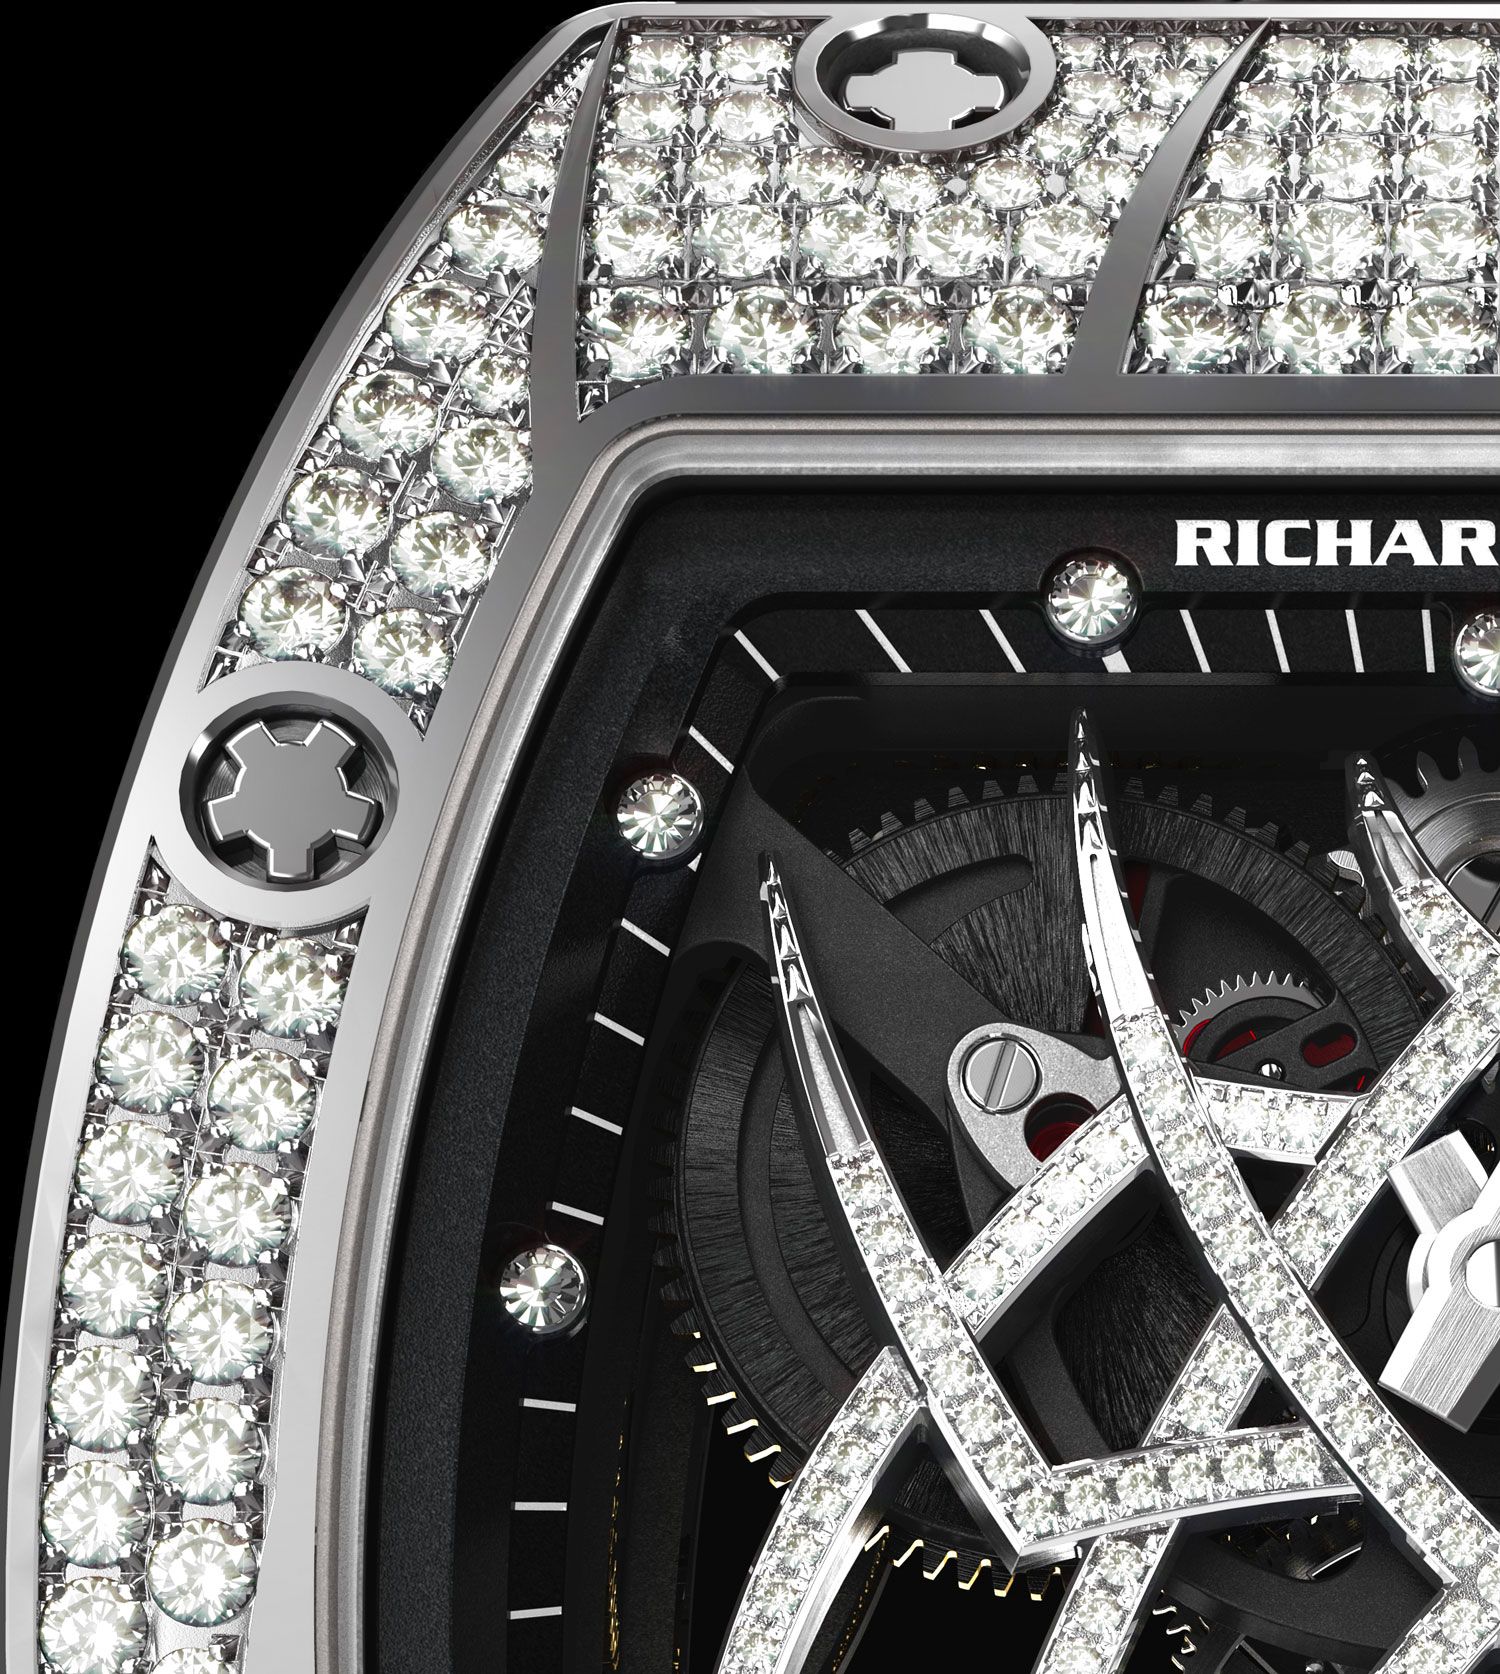 Richard Mille Manual Winding Tourbillon Alain Prost Carbon TPT Limited edition of 30 pieces - RM70-01